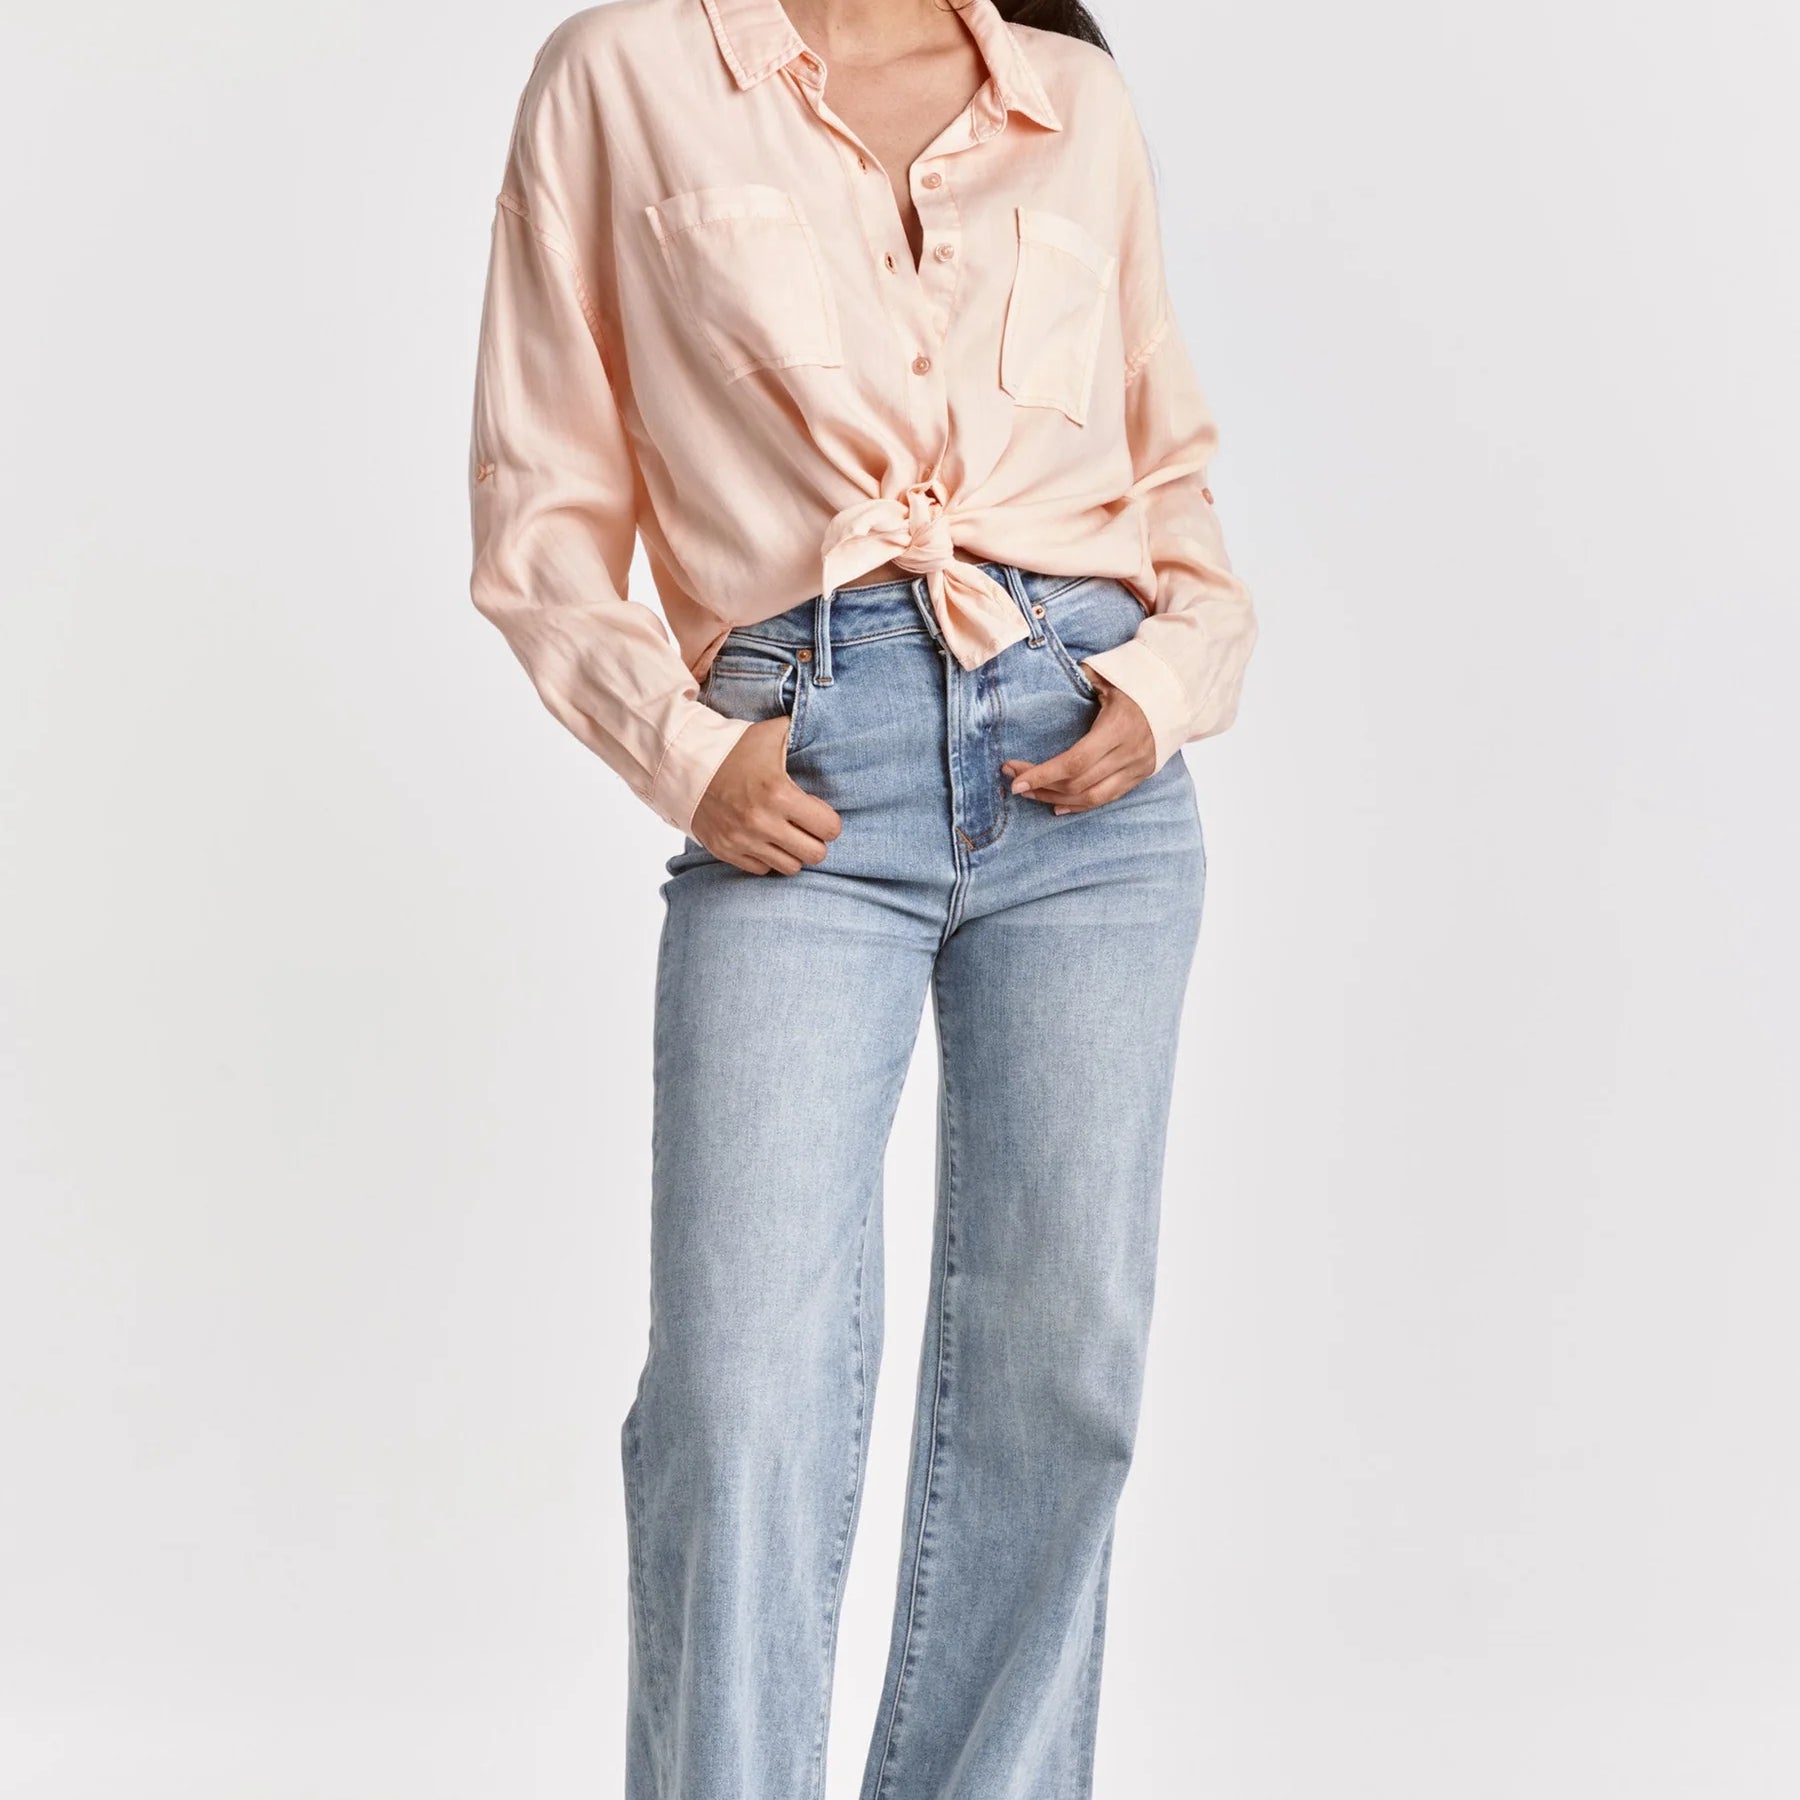 Fiona Mid Rise Wide Leg Jeans